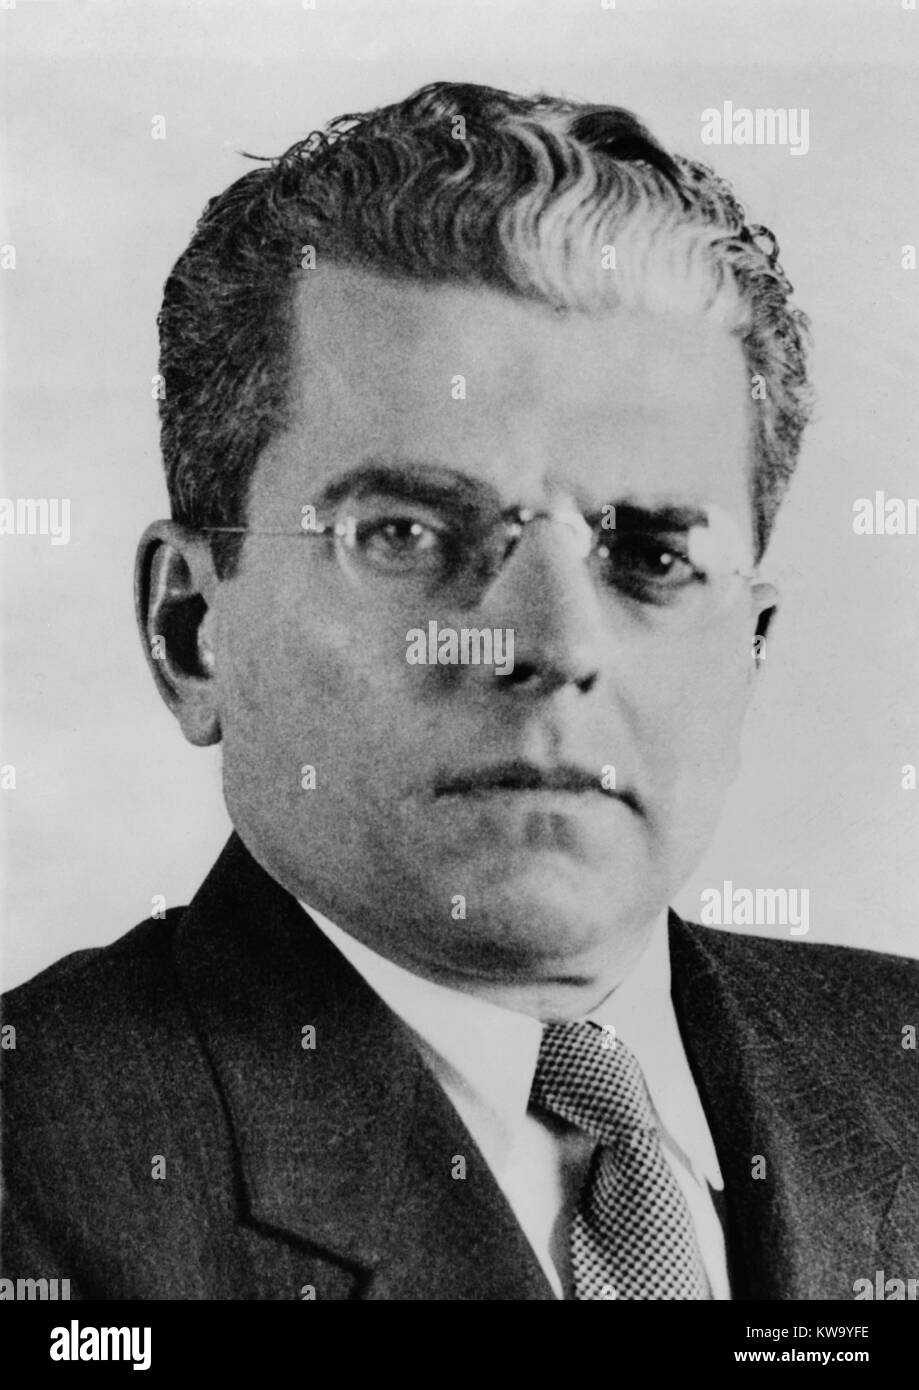 Thomas Donegan, a Justice department anti-Communist expert. He was involved in the prosecution of Alger Hiss and others during the Postwar Red Scare. 1946. (BSLOC 2014 13 62) Stock Photo